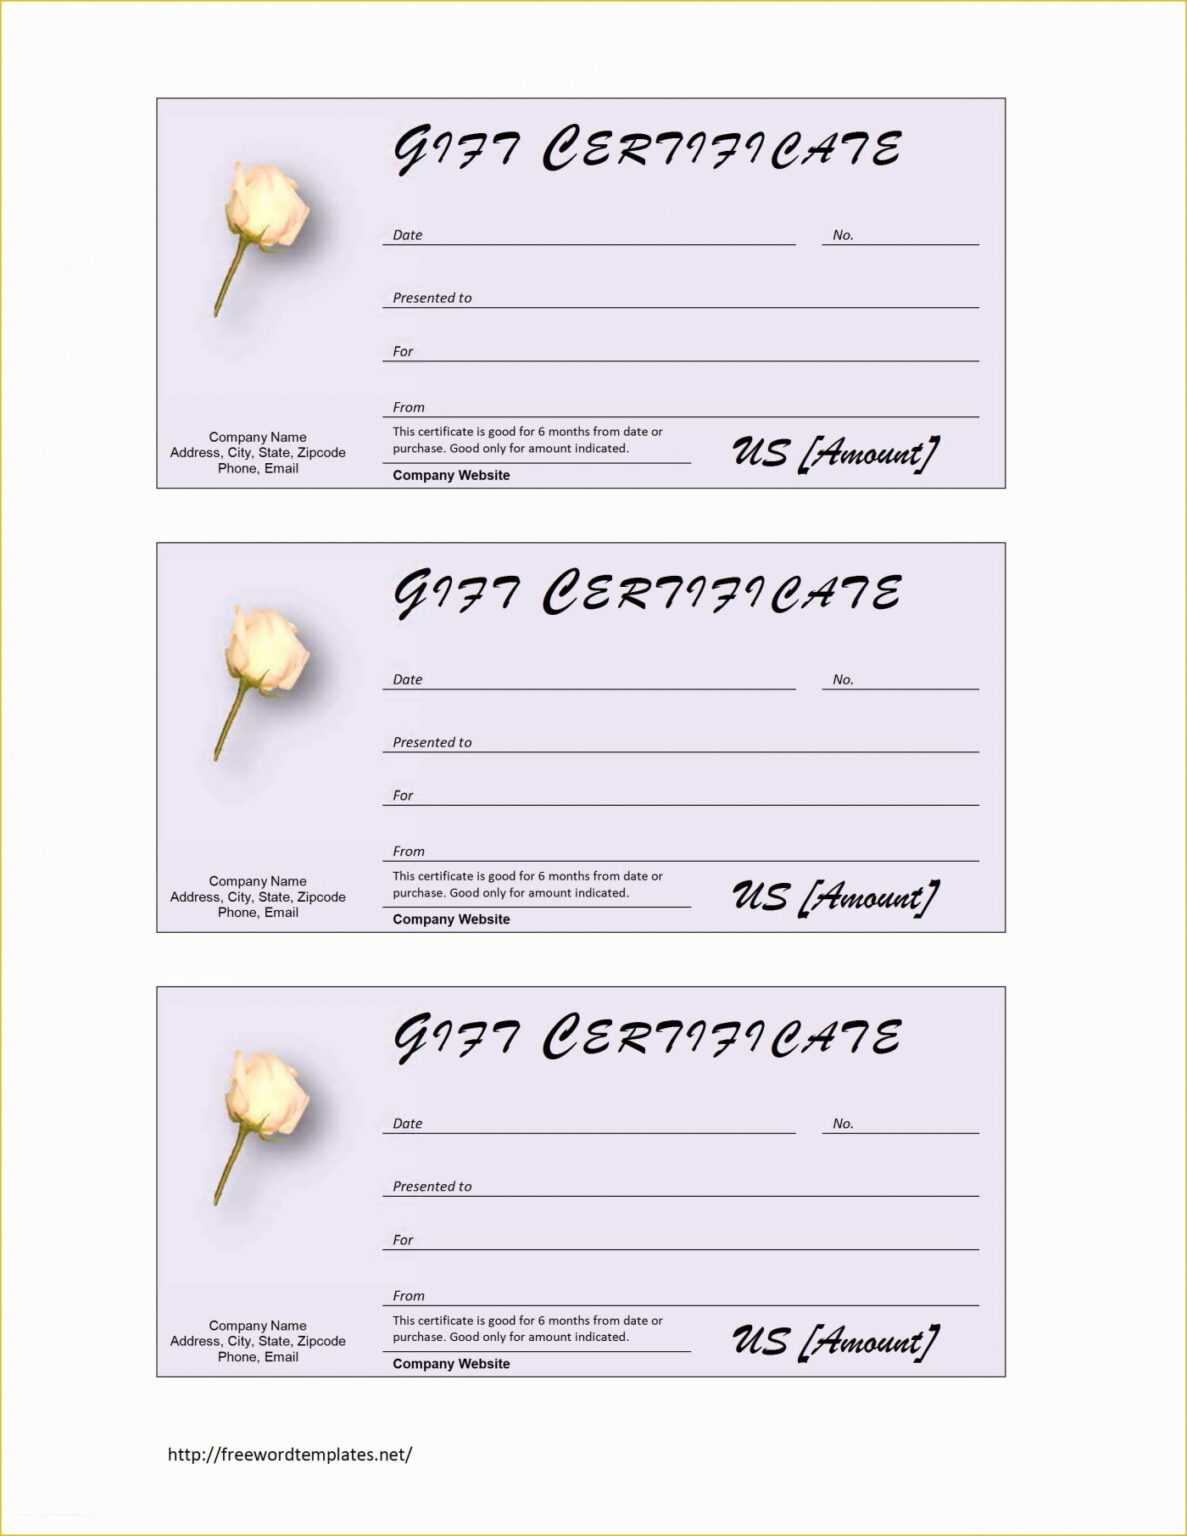 printable-gift-certificate-template-dtemplates-for-massage-gift